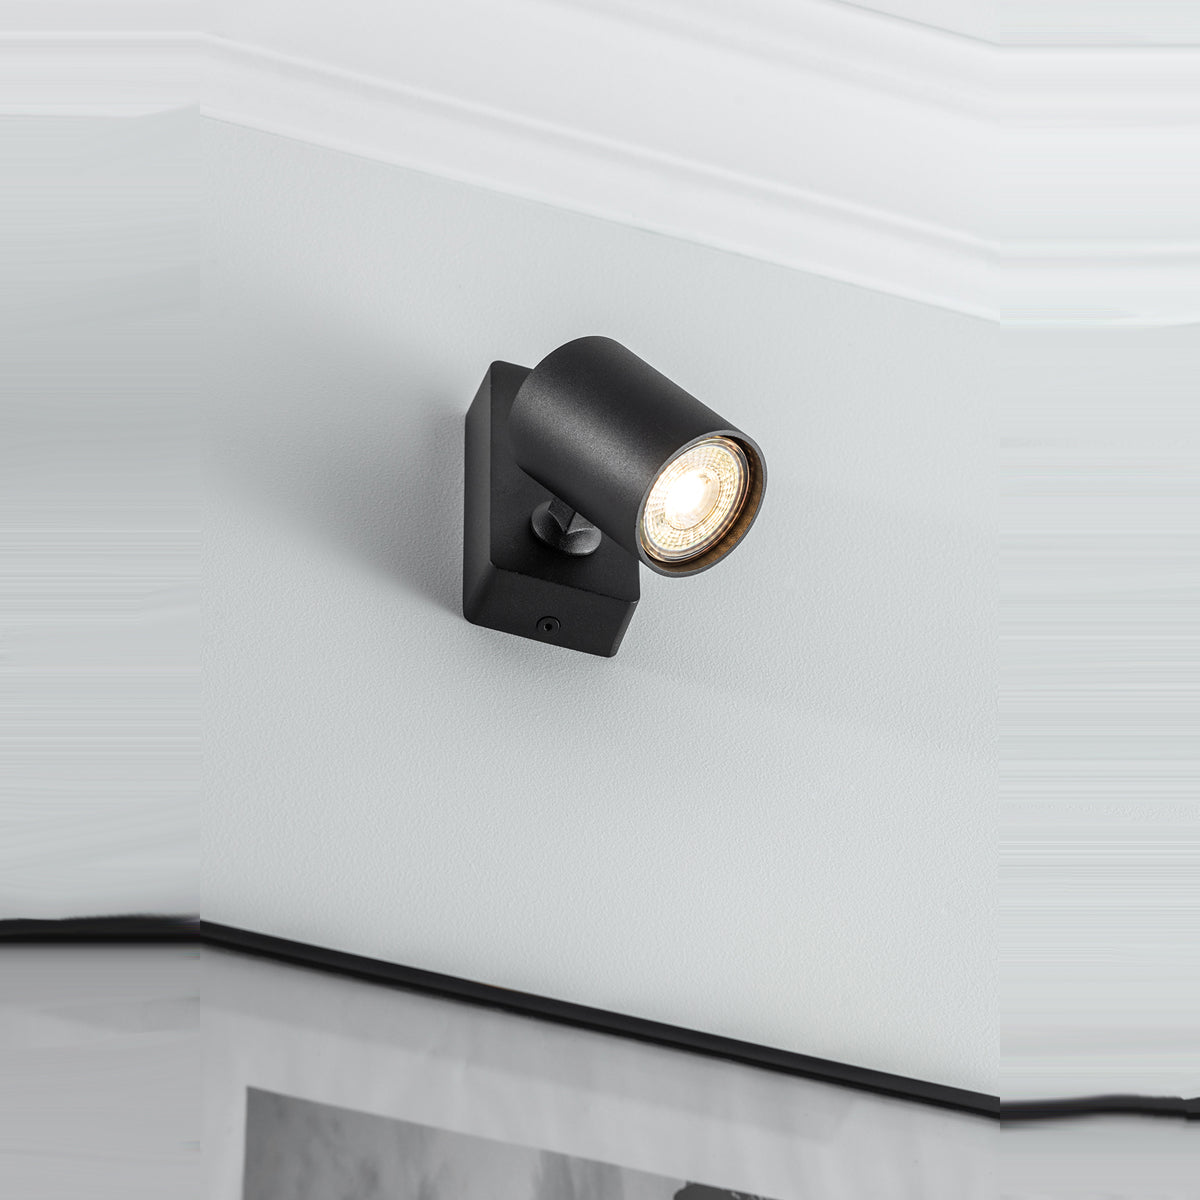 The black Nell lamp consists of a cylindrical spotlight, which can be tilted and adjusted on its own axis. The spotlight is attached to a rectangular bracket, which makes it equally suitable for mounting on walls and ceilings. Made of an aluminium body and powder coated black, the lamp with its simple design fits well into different spaces. Whether functional office or cosy home - the timeless lamp is an perfect for many types of use.